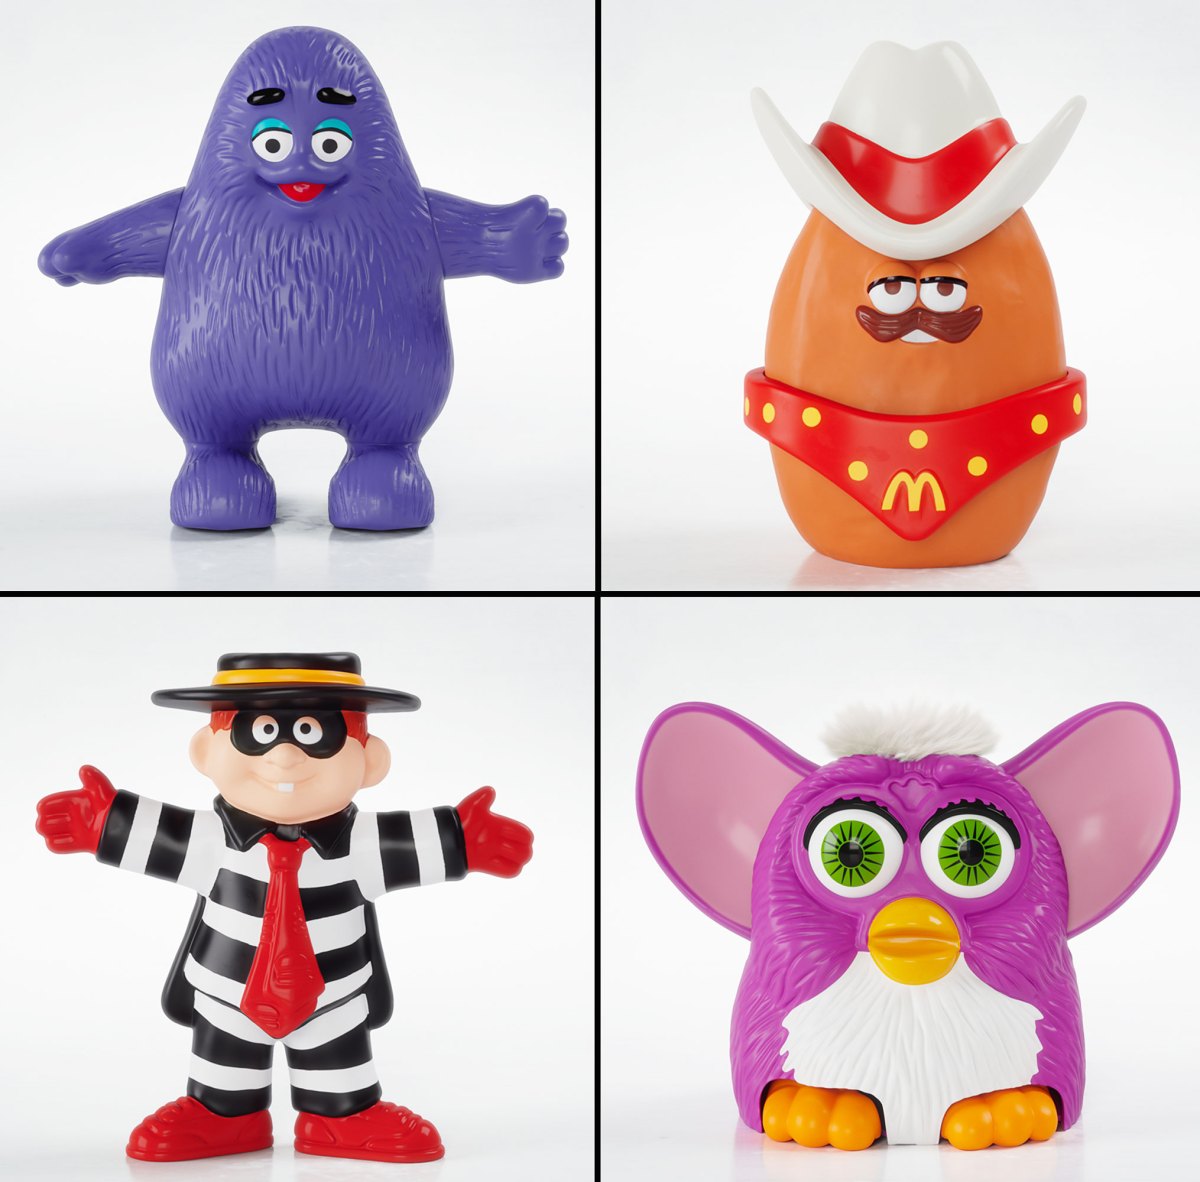 10 Most Valuable McDonald's Toys Of All Time vlr.eng.br